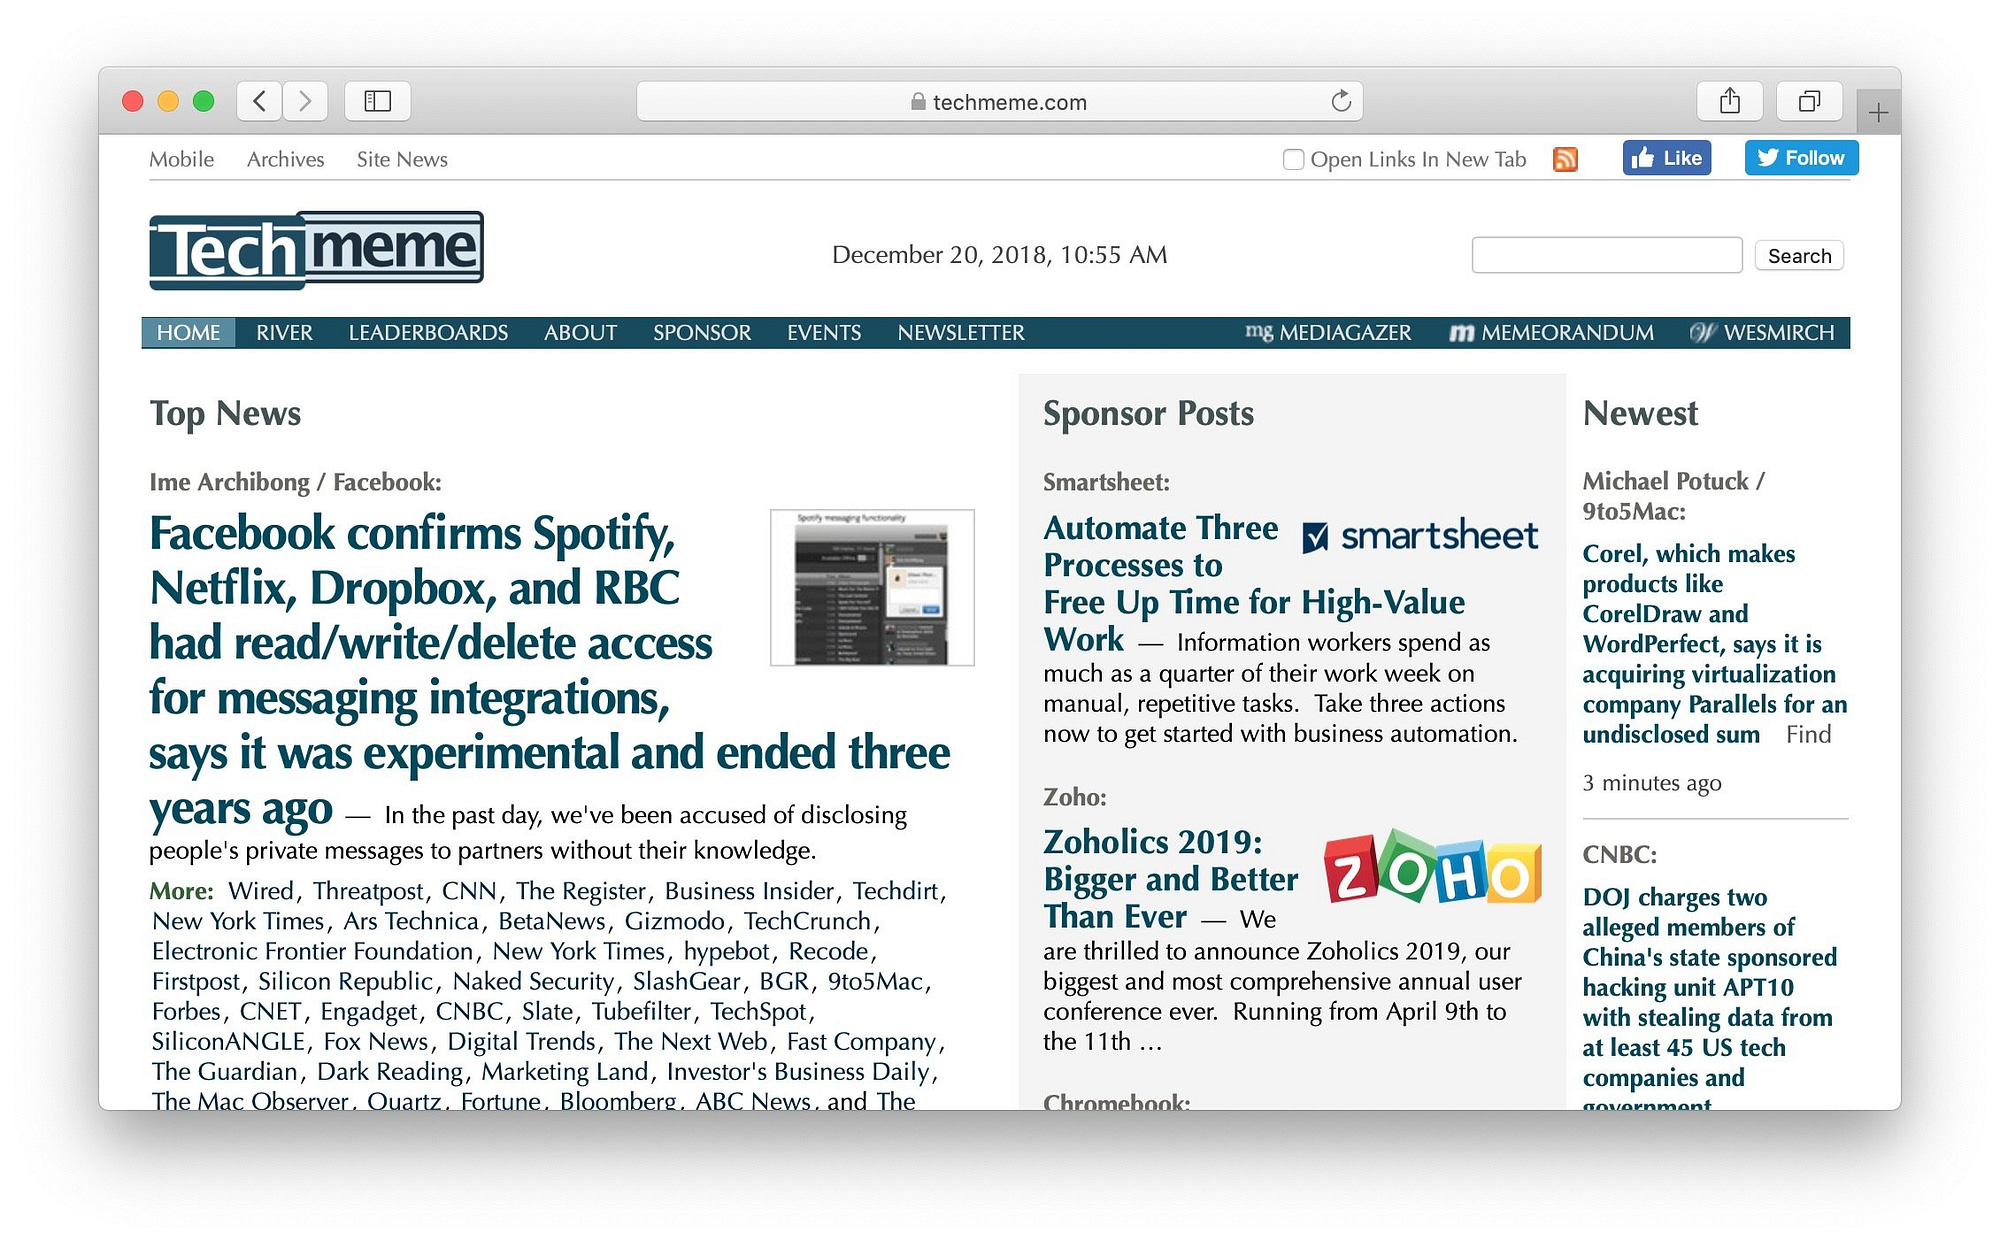 The front page of the TechMeme content aggregator